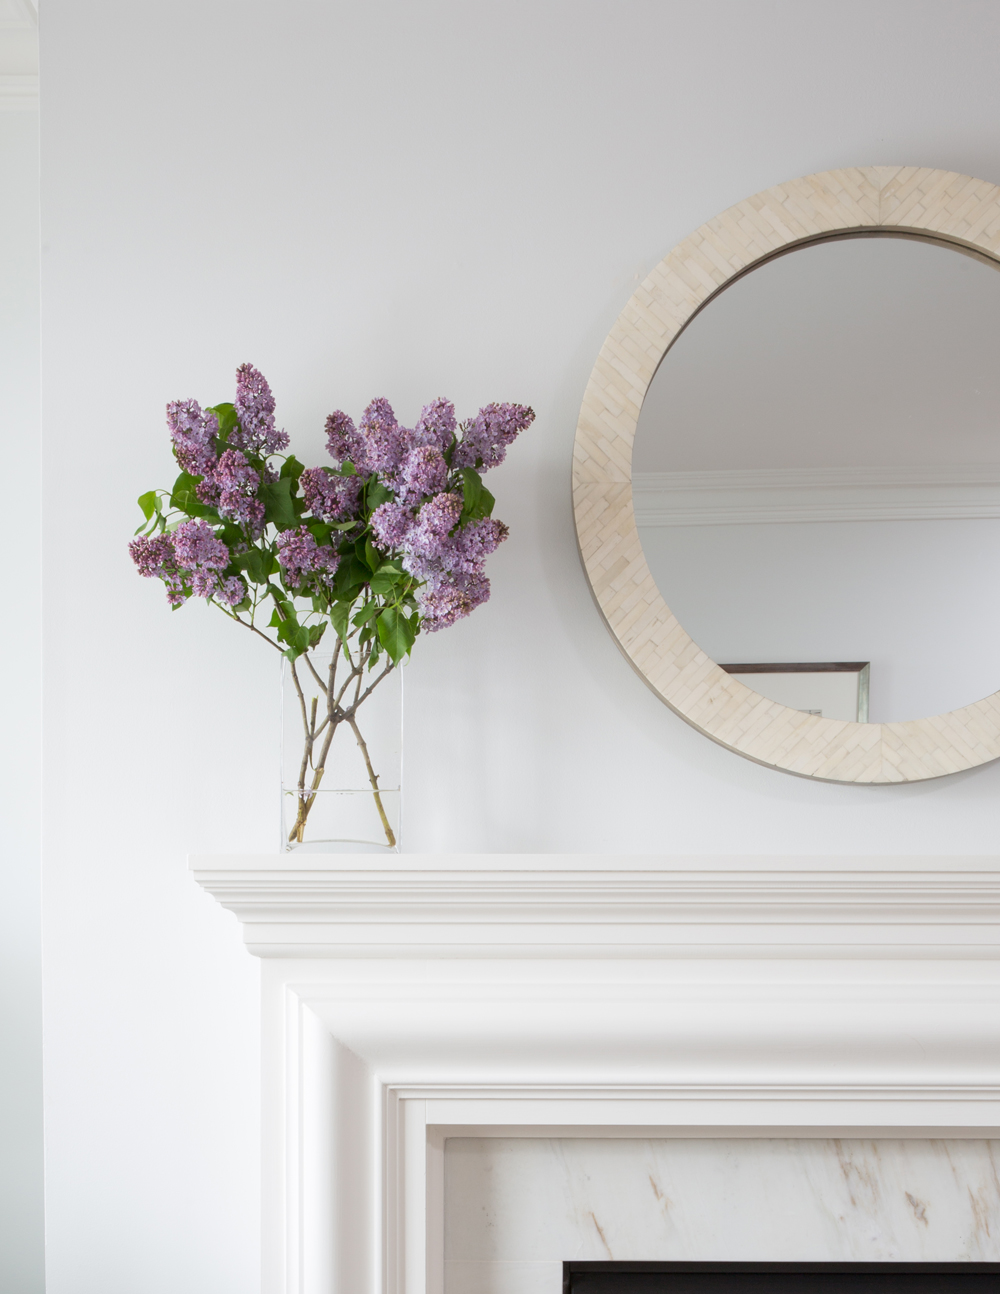 lilacs on mantel by round mirror